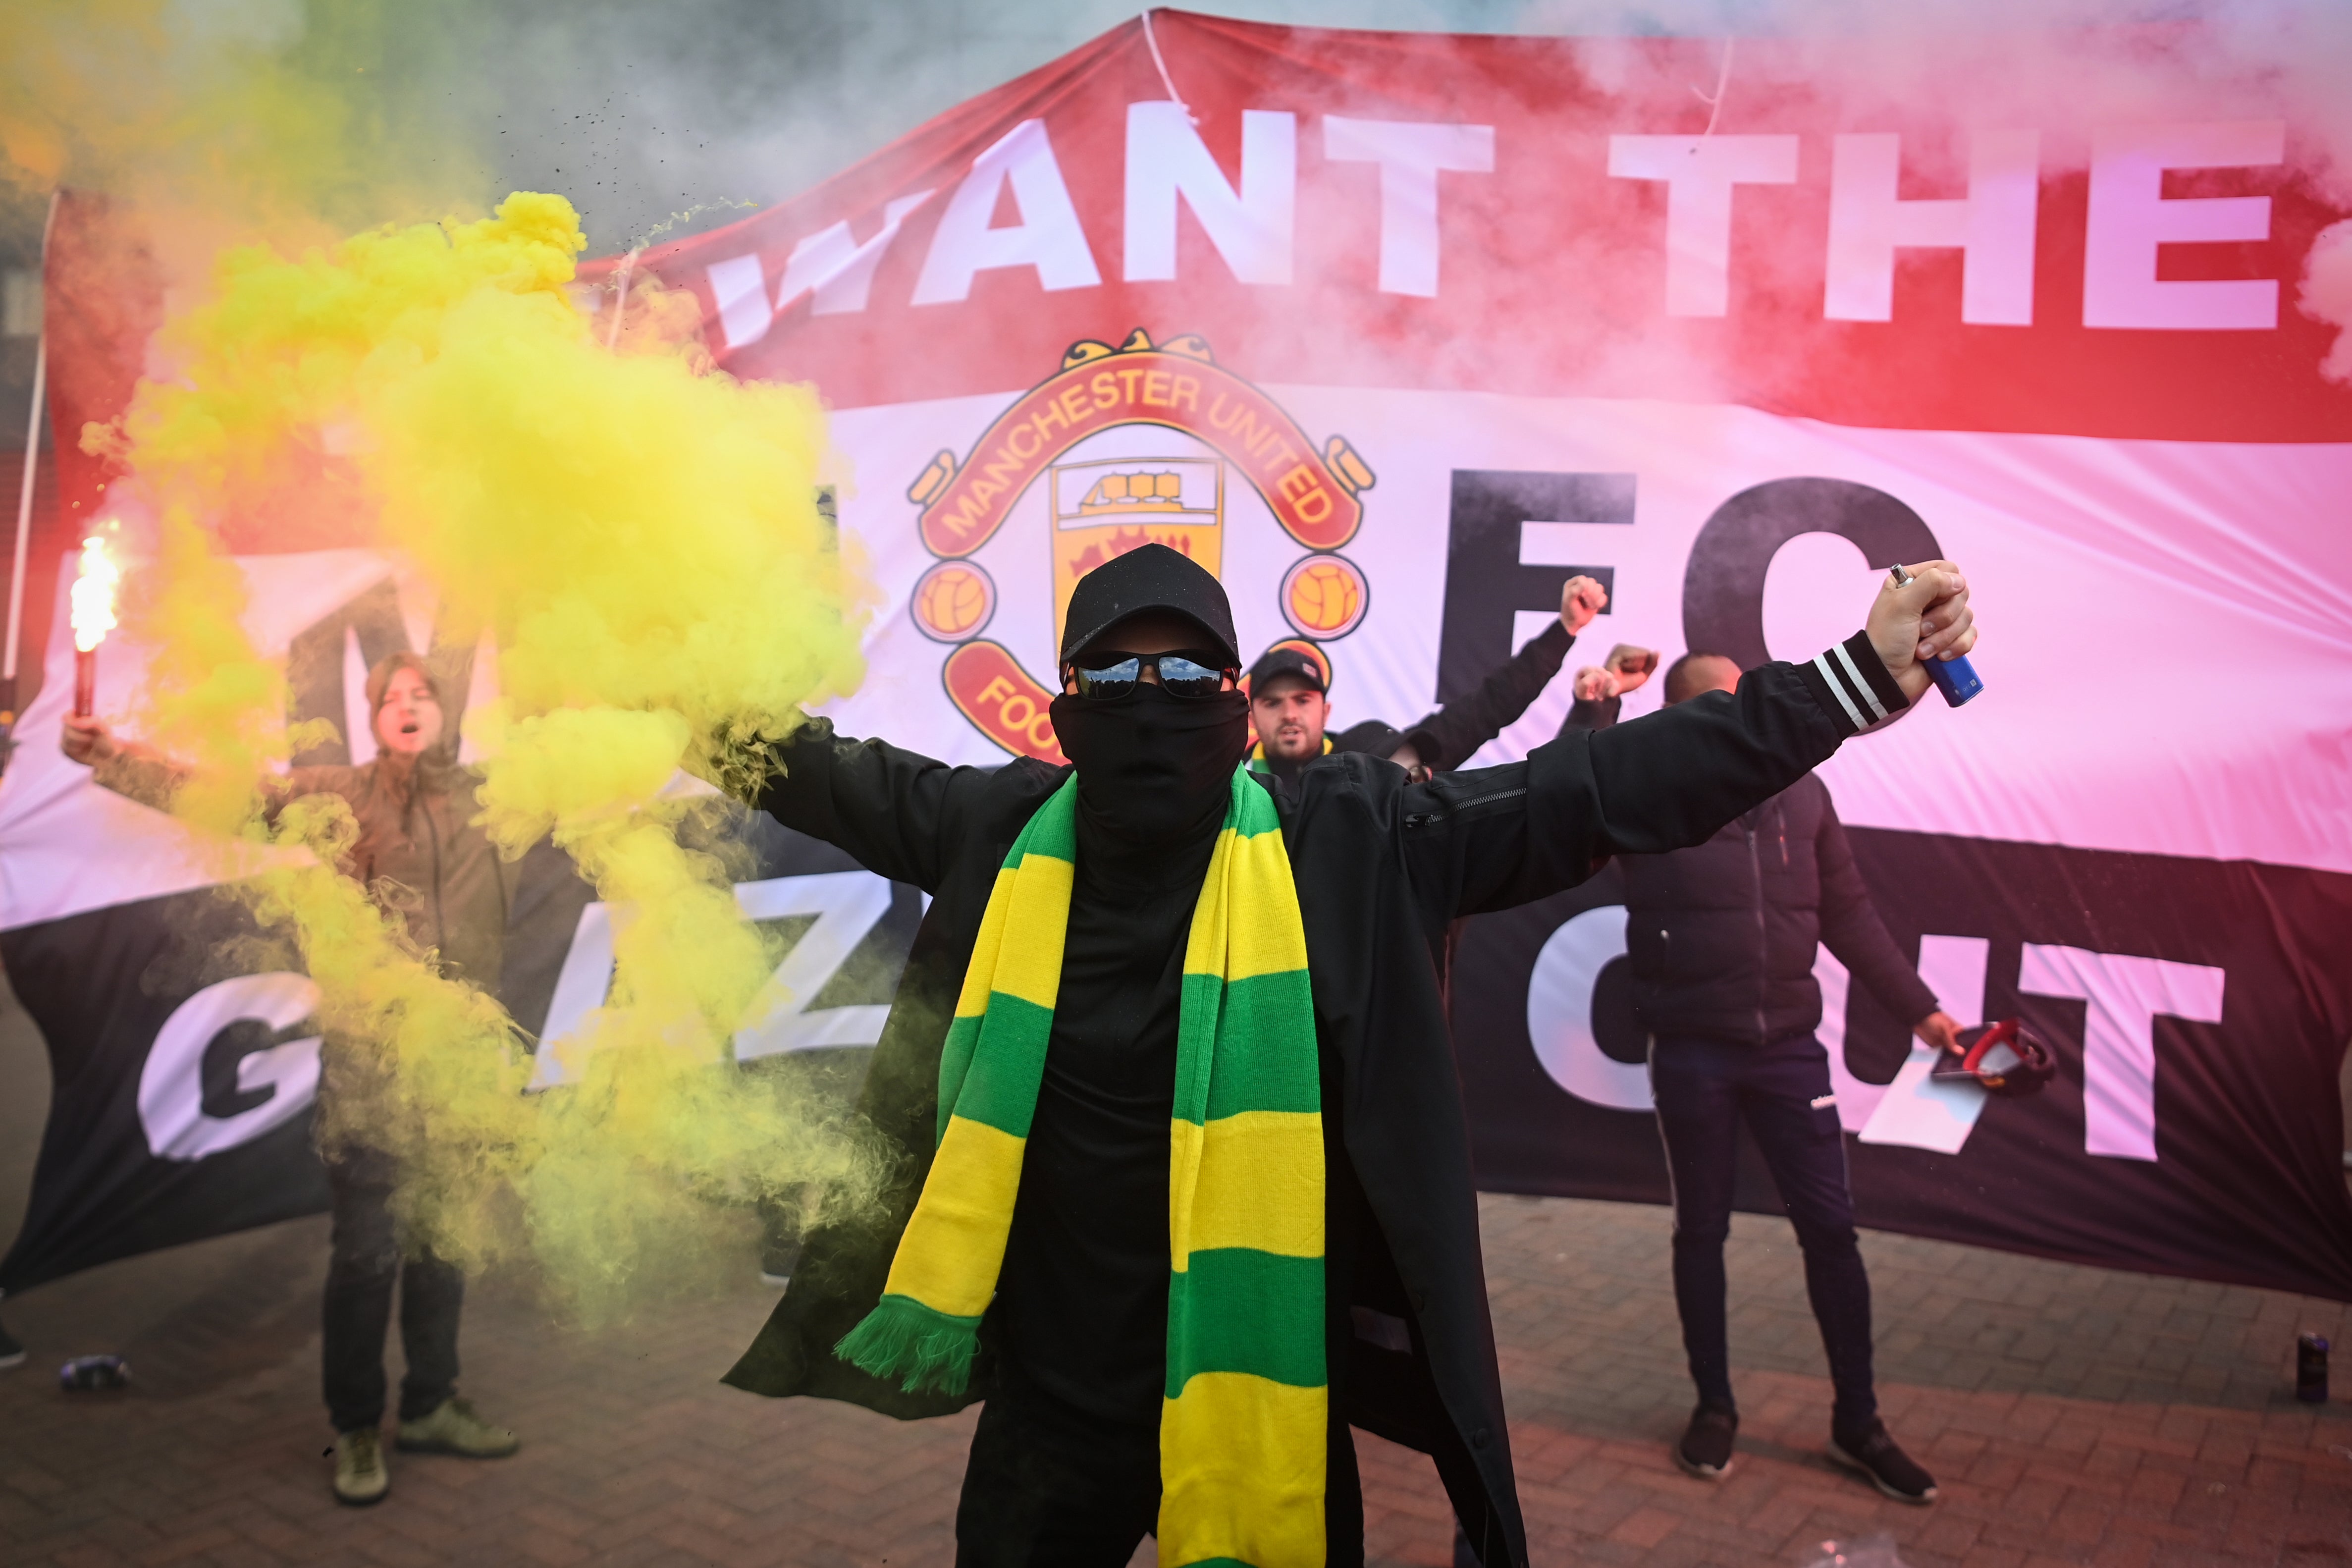 Fans are seen protesting Manchester United’s Glazer ownership outside Old Trafford